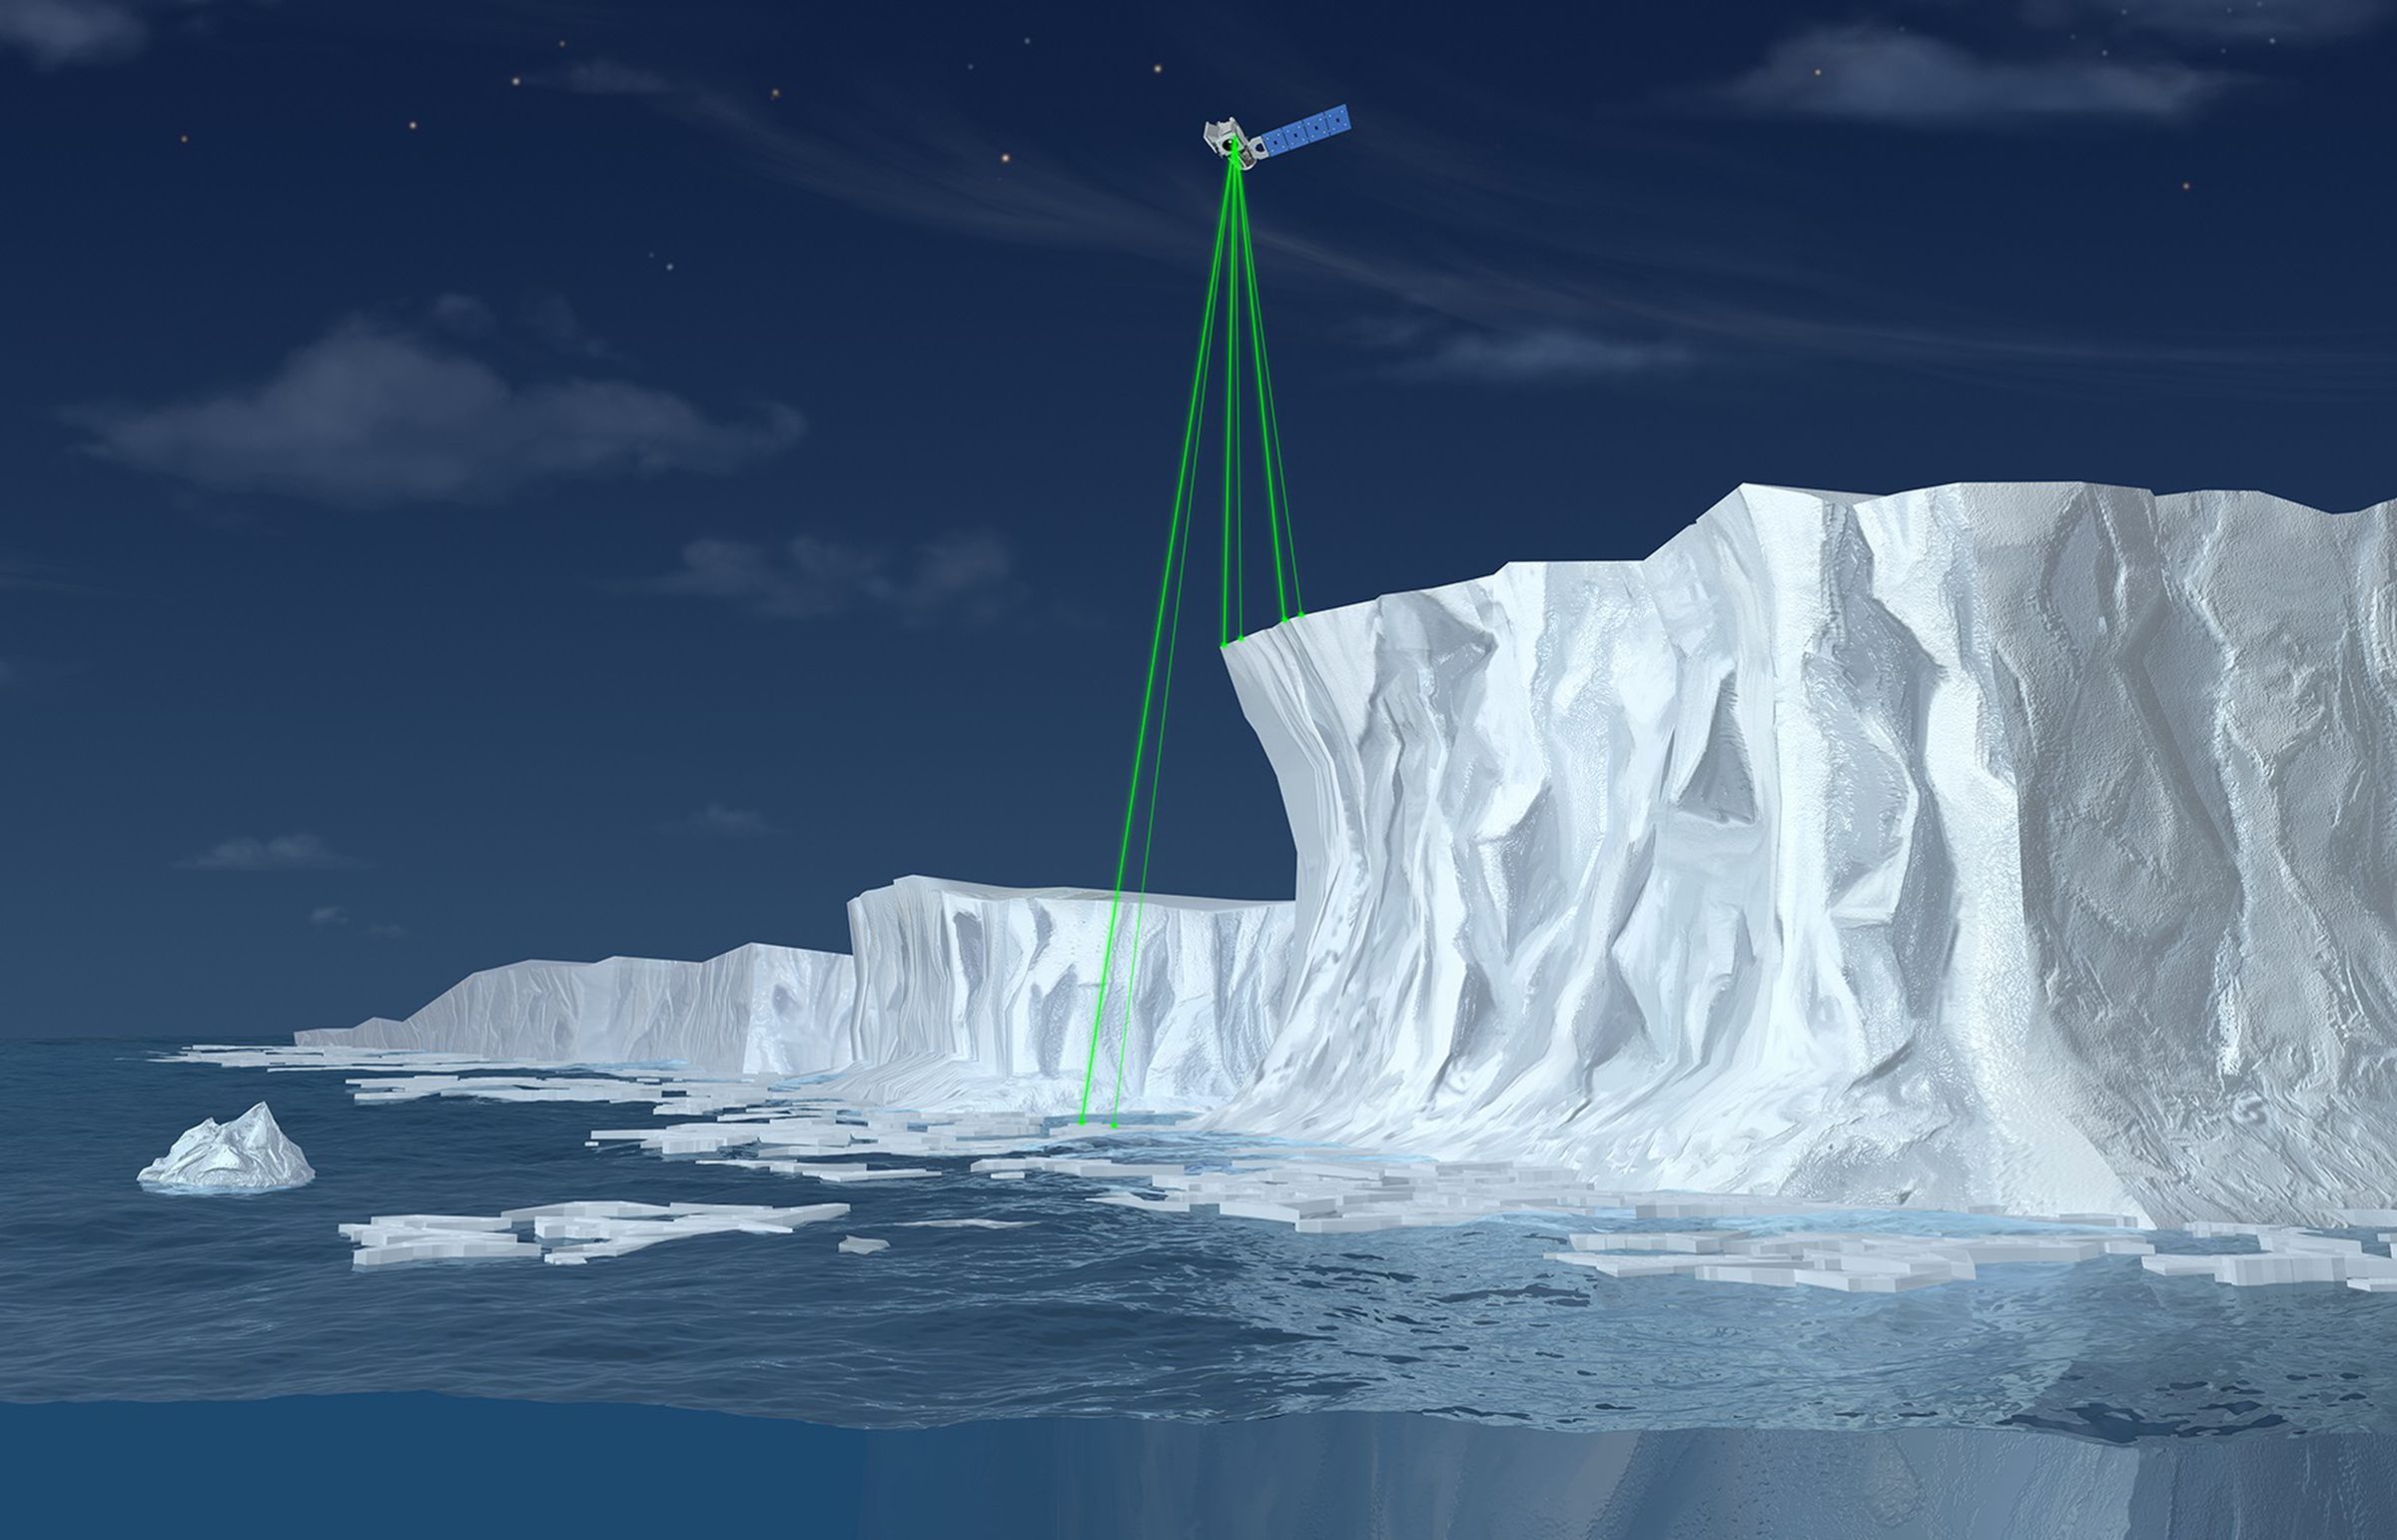 A rendering of ICESat-2 measuring the polar ice from space.